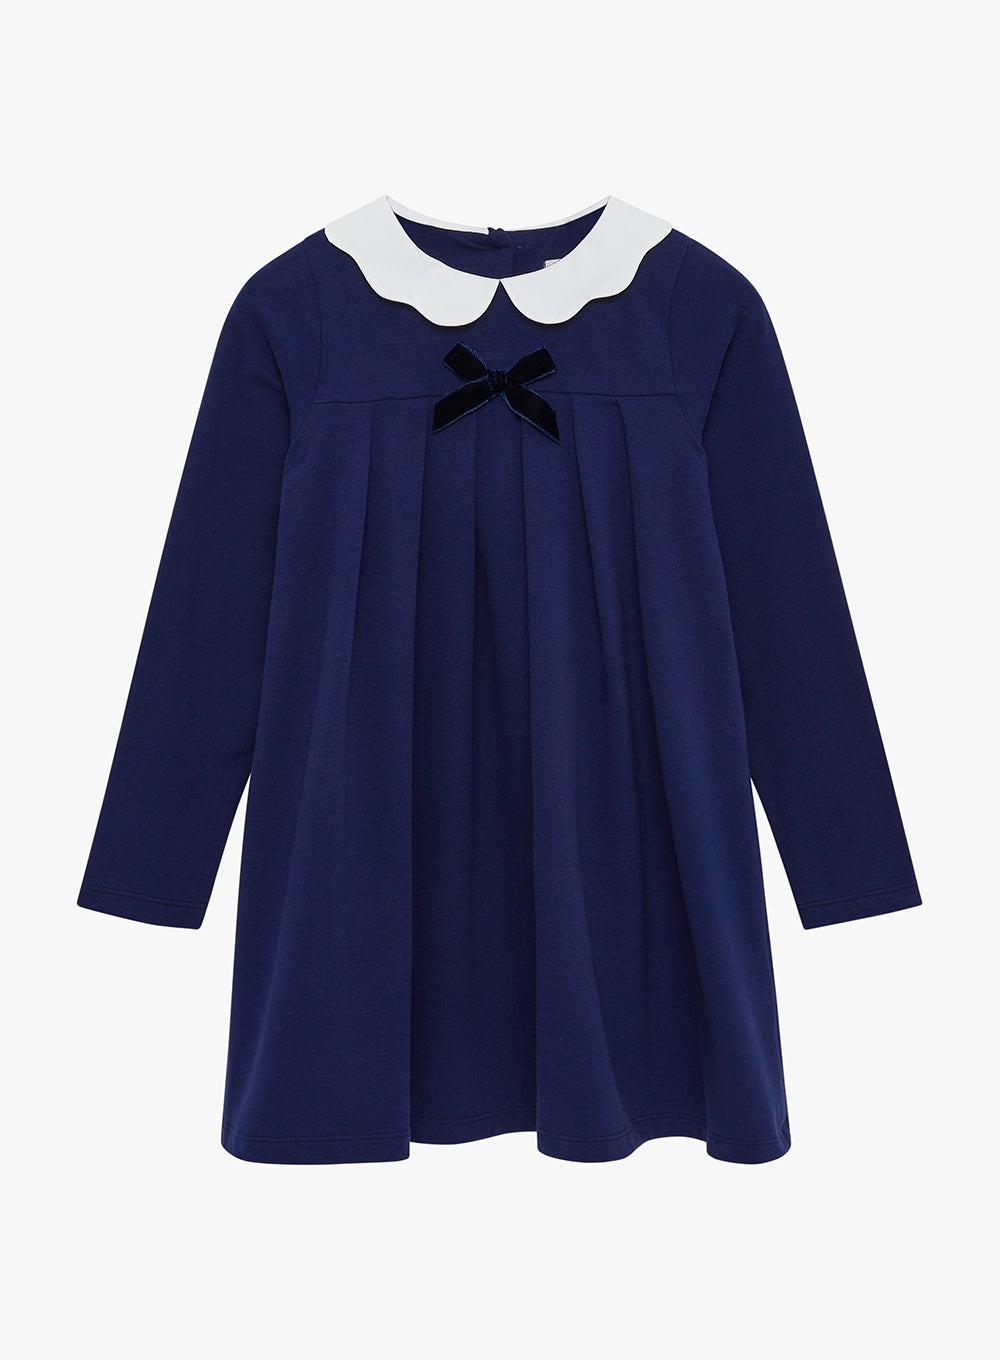 Girls Anna Jersey Dress in Navy | Trotters London – Trotters ...